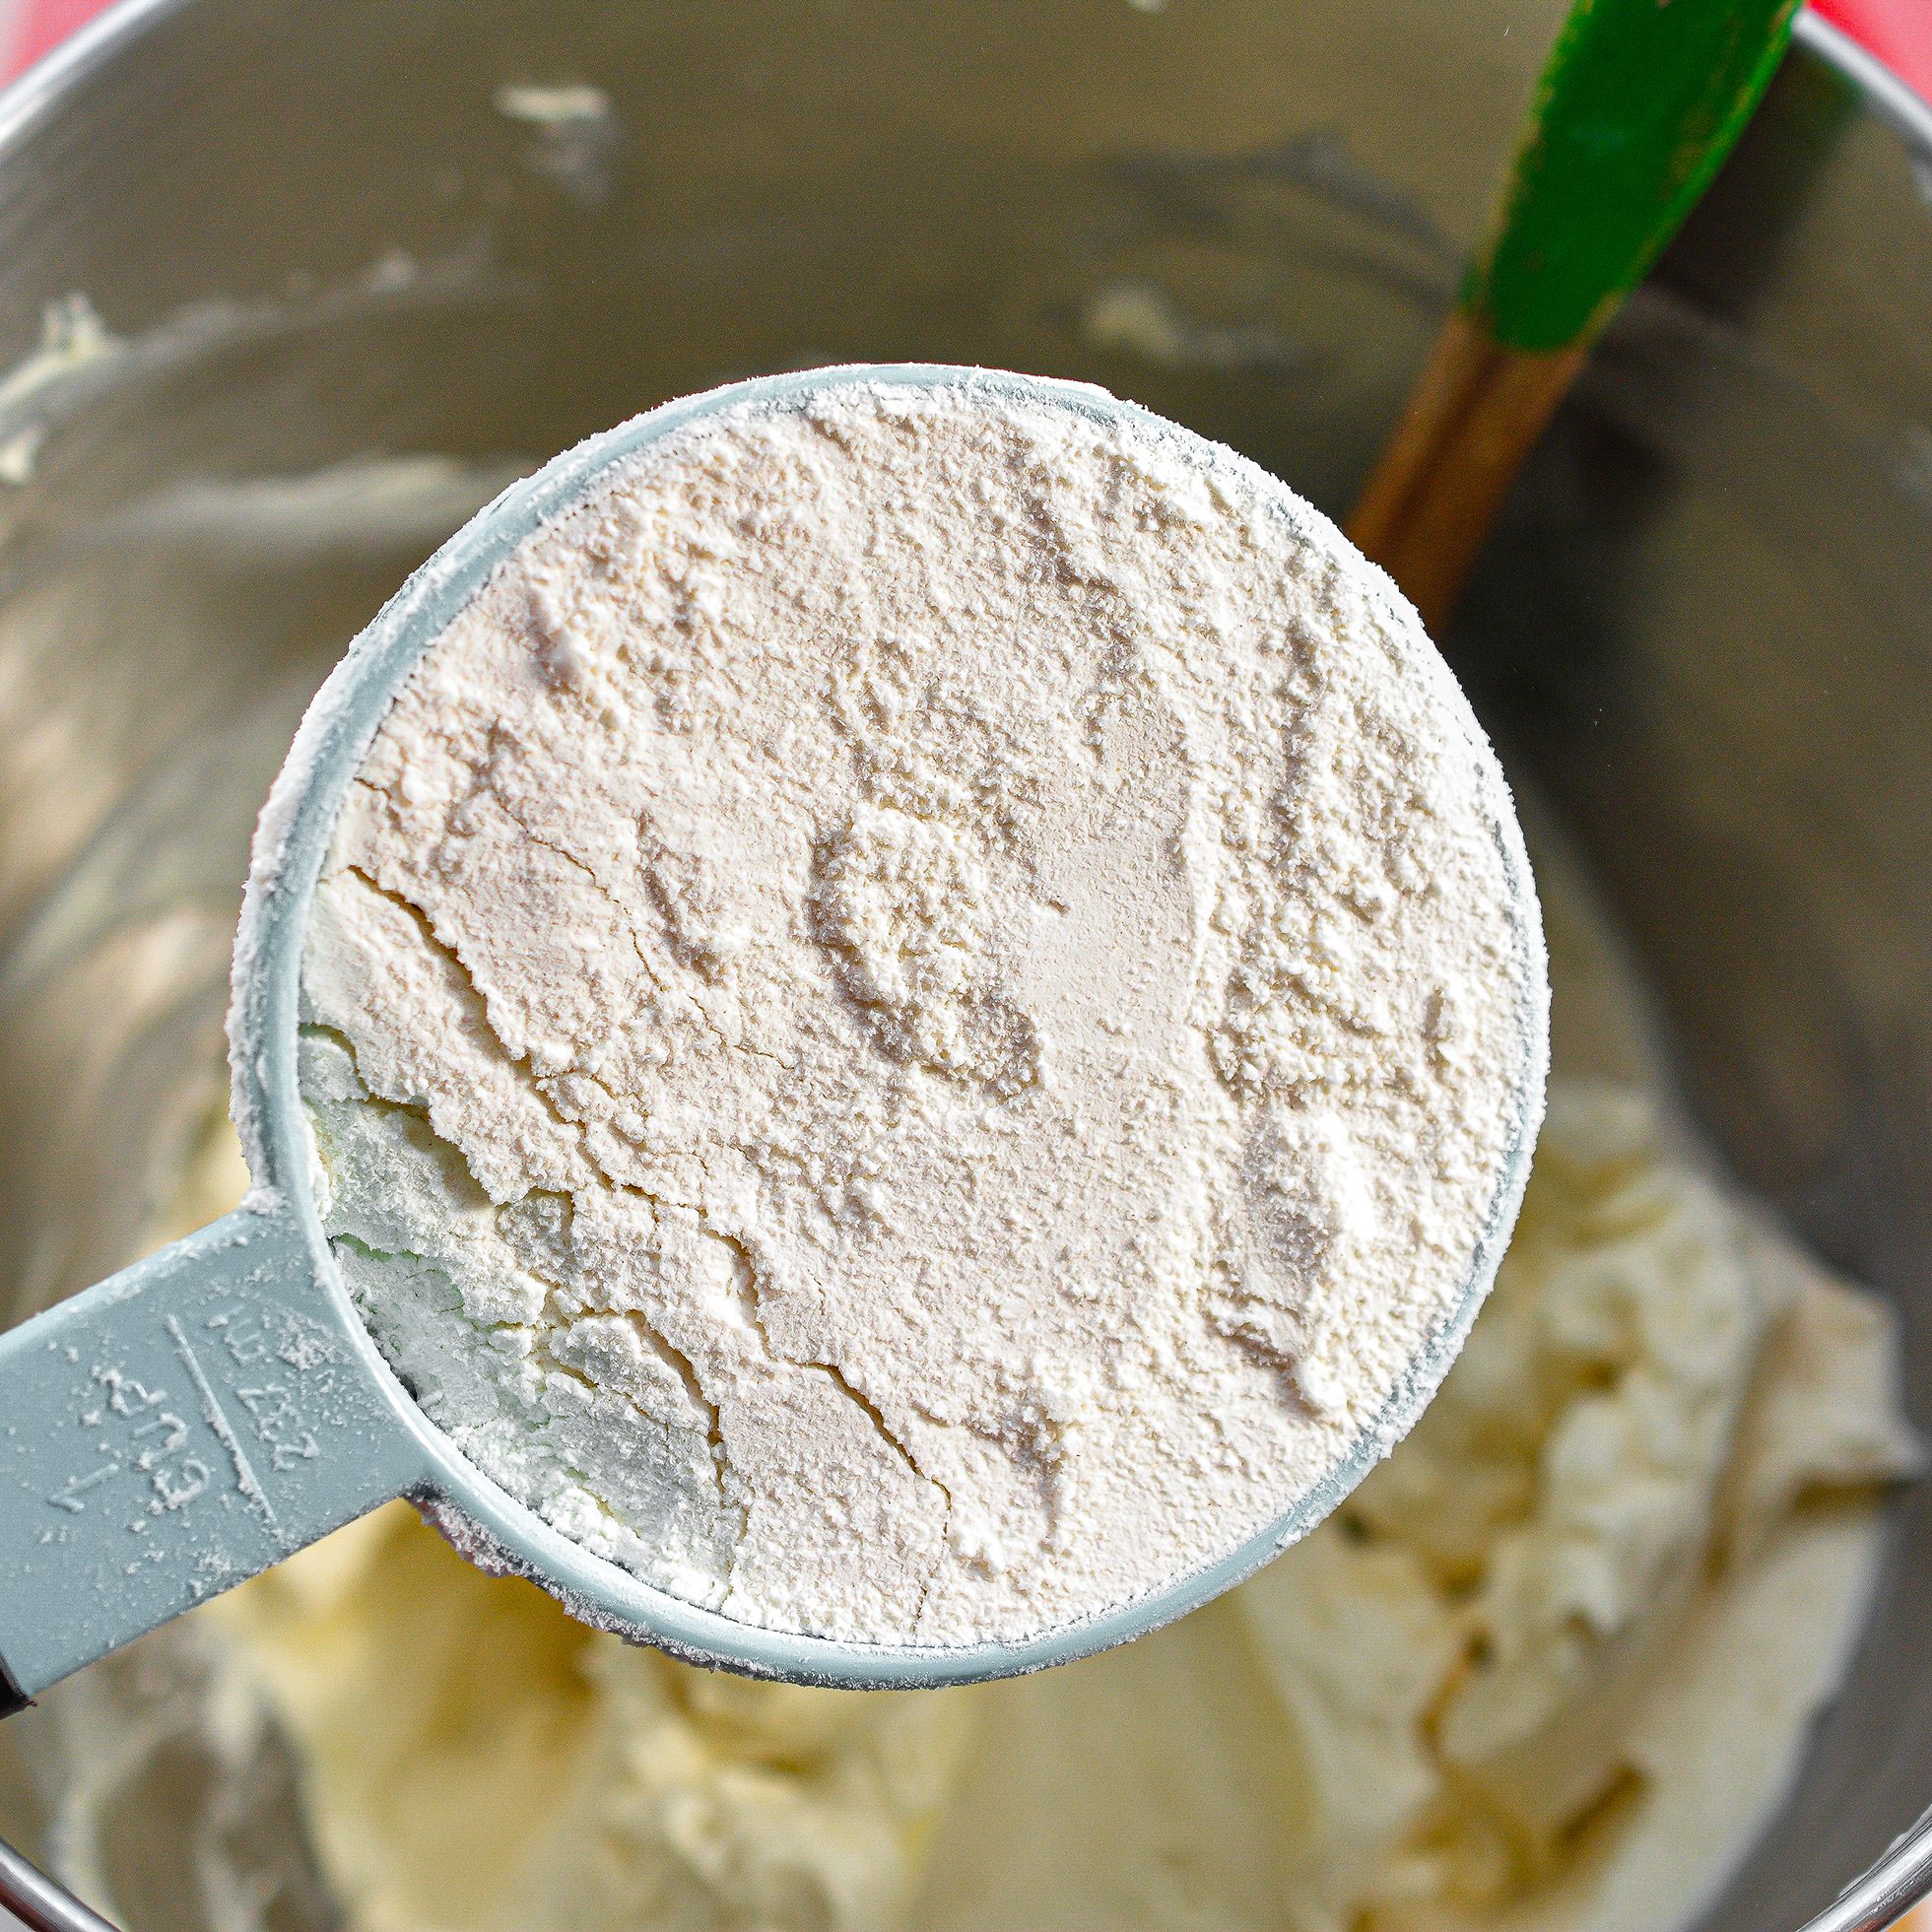 Place the remaining ingredients for the cookies into the mixing bowl, and beat until a well-combined dough has formed.